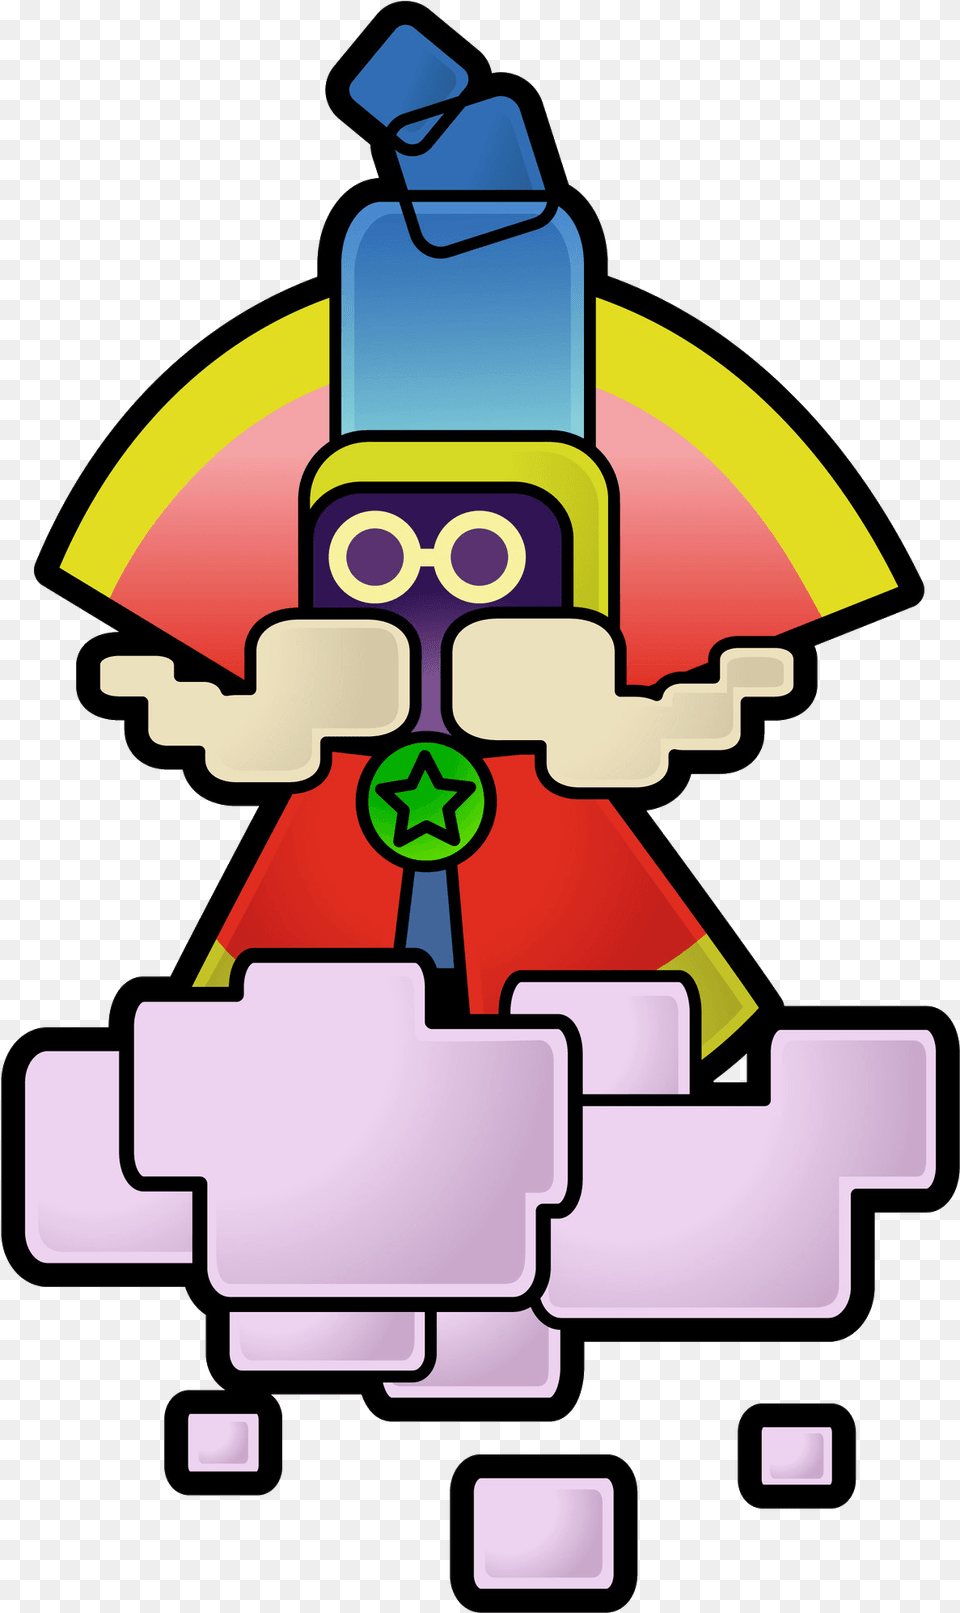 Cloud Guypaper Mario Cloud Guy Super Paper Mario Characters, Ammunition, Grenade, Weapon, Robot Free Png